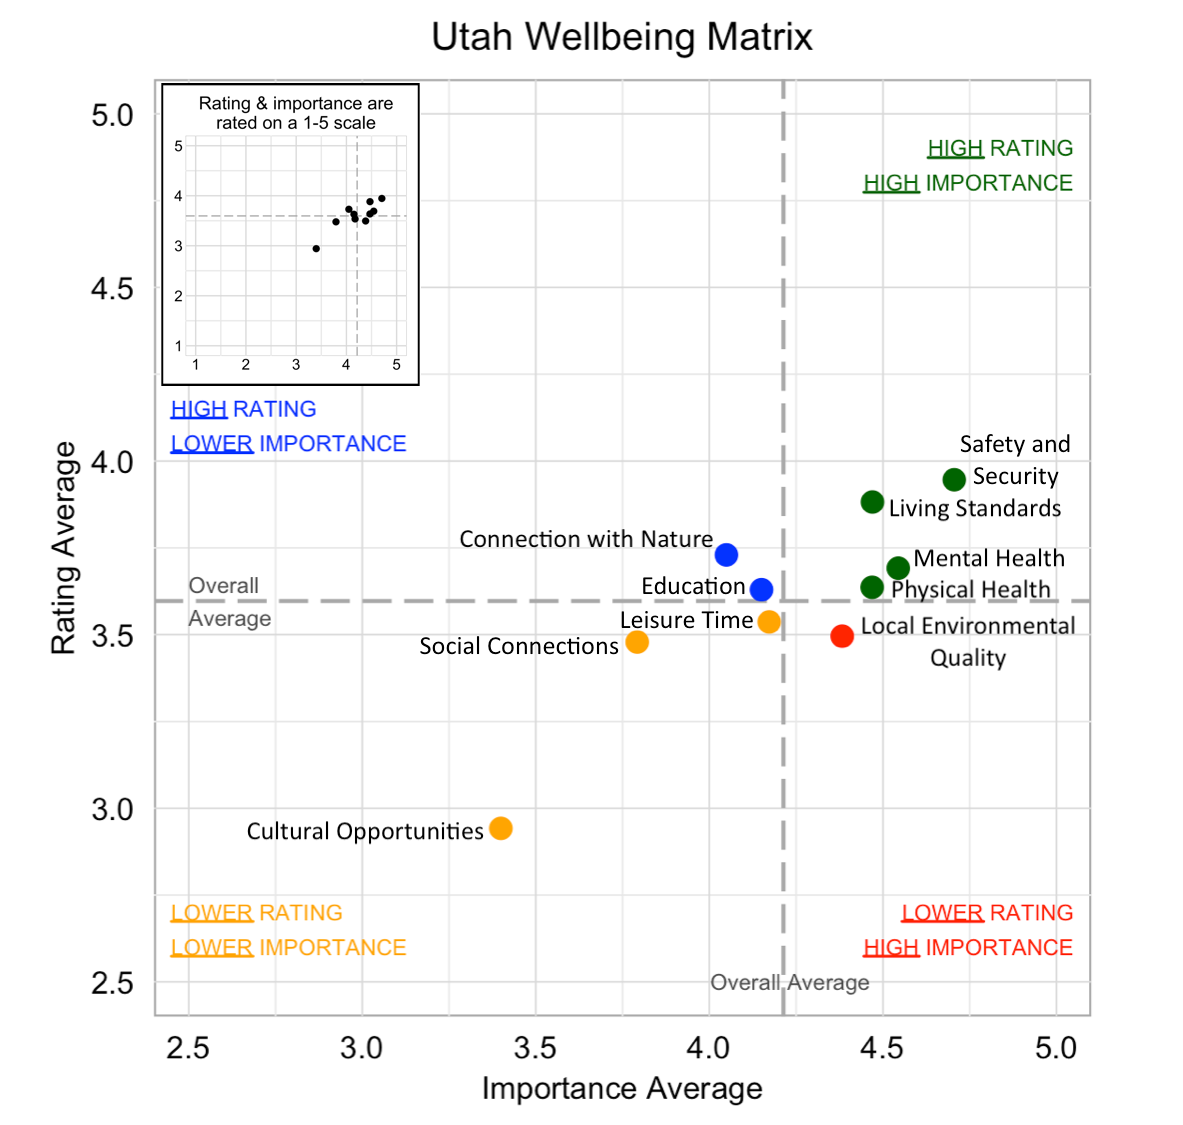 Scatterplot. Title: Utah Wellbeing Matrix. Domains are classified into four quadrants depending on their average rating and average importance as compared to the average of all the average domain ratings and the average of all the average domain importance ratings. High rating, high importance (green quadrant) domains include: Safety and Security, Living Standards, Mental Health, Physical Health. High rating, lower Importance (blue quadrant) domains include: Connection with Nature, Education. Lower rating, lower importance (yellow quadrant) domains include: Leisure Time,  Social Connections, and Cultural Opportunities. Lower rating, high importance (red quadrant) domains include: Local Environmental Quality.